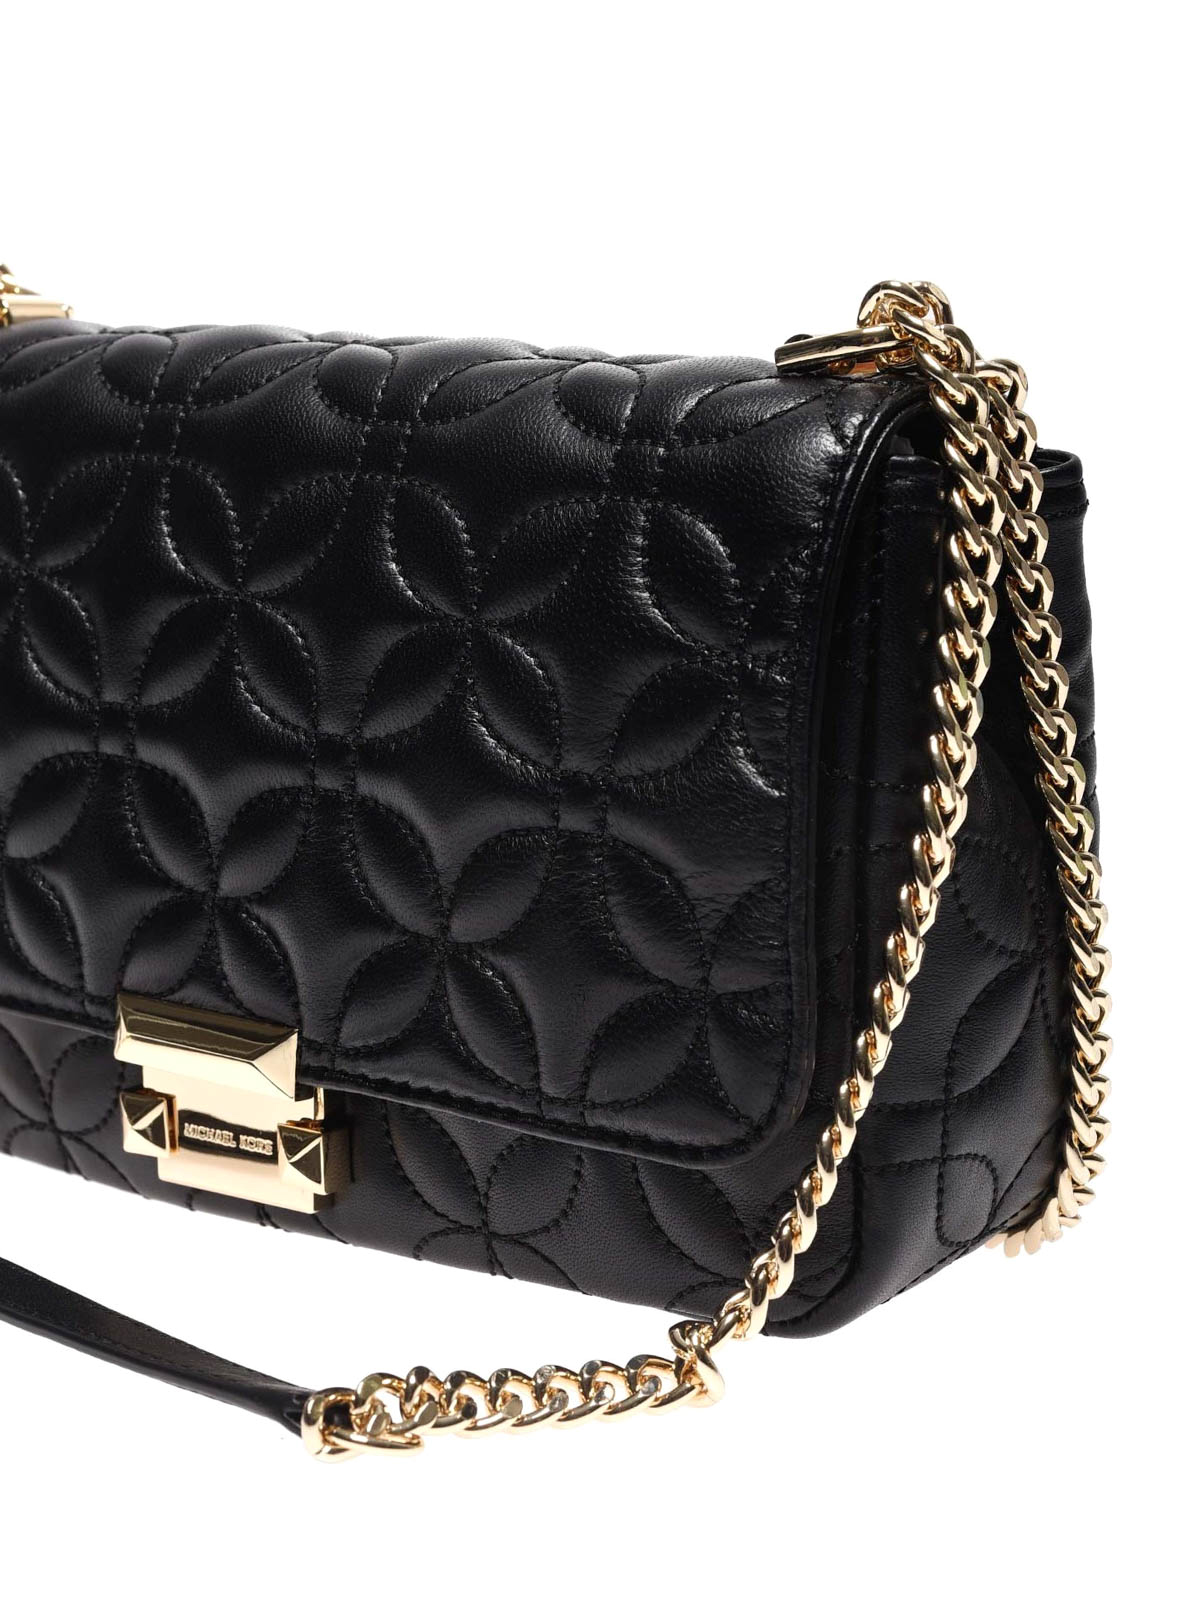 black quilted michael kors purse